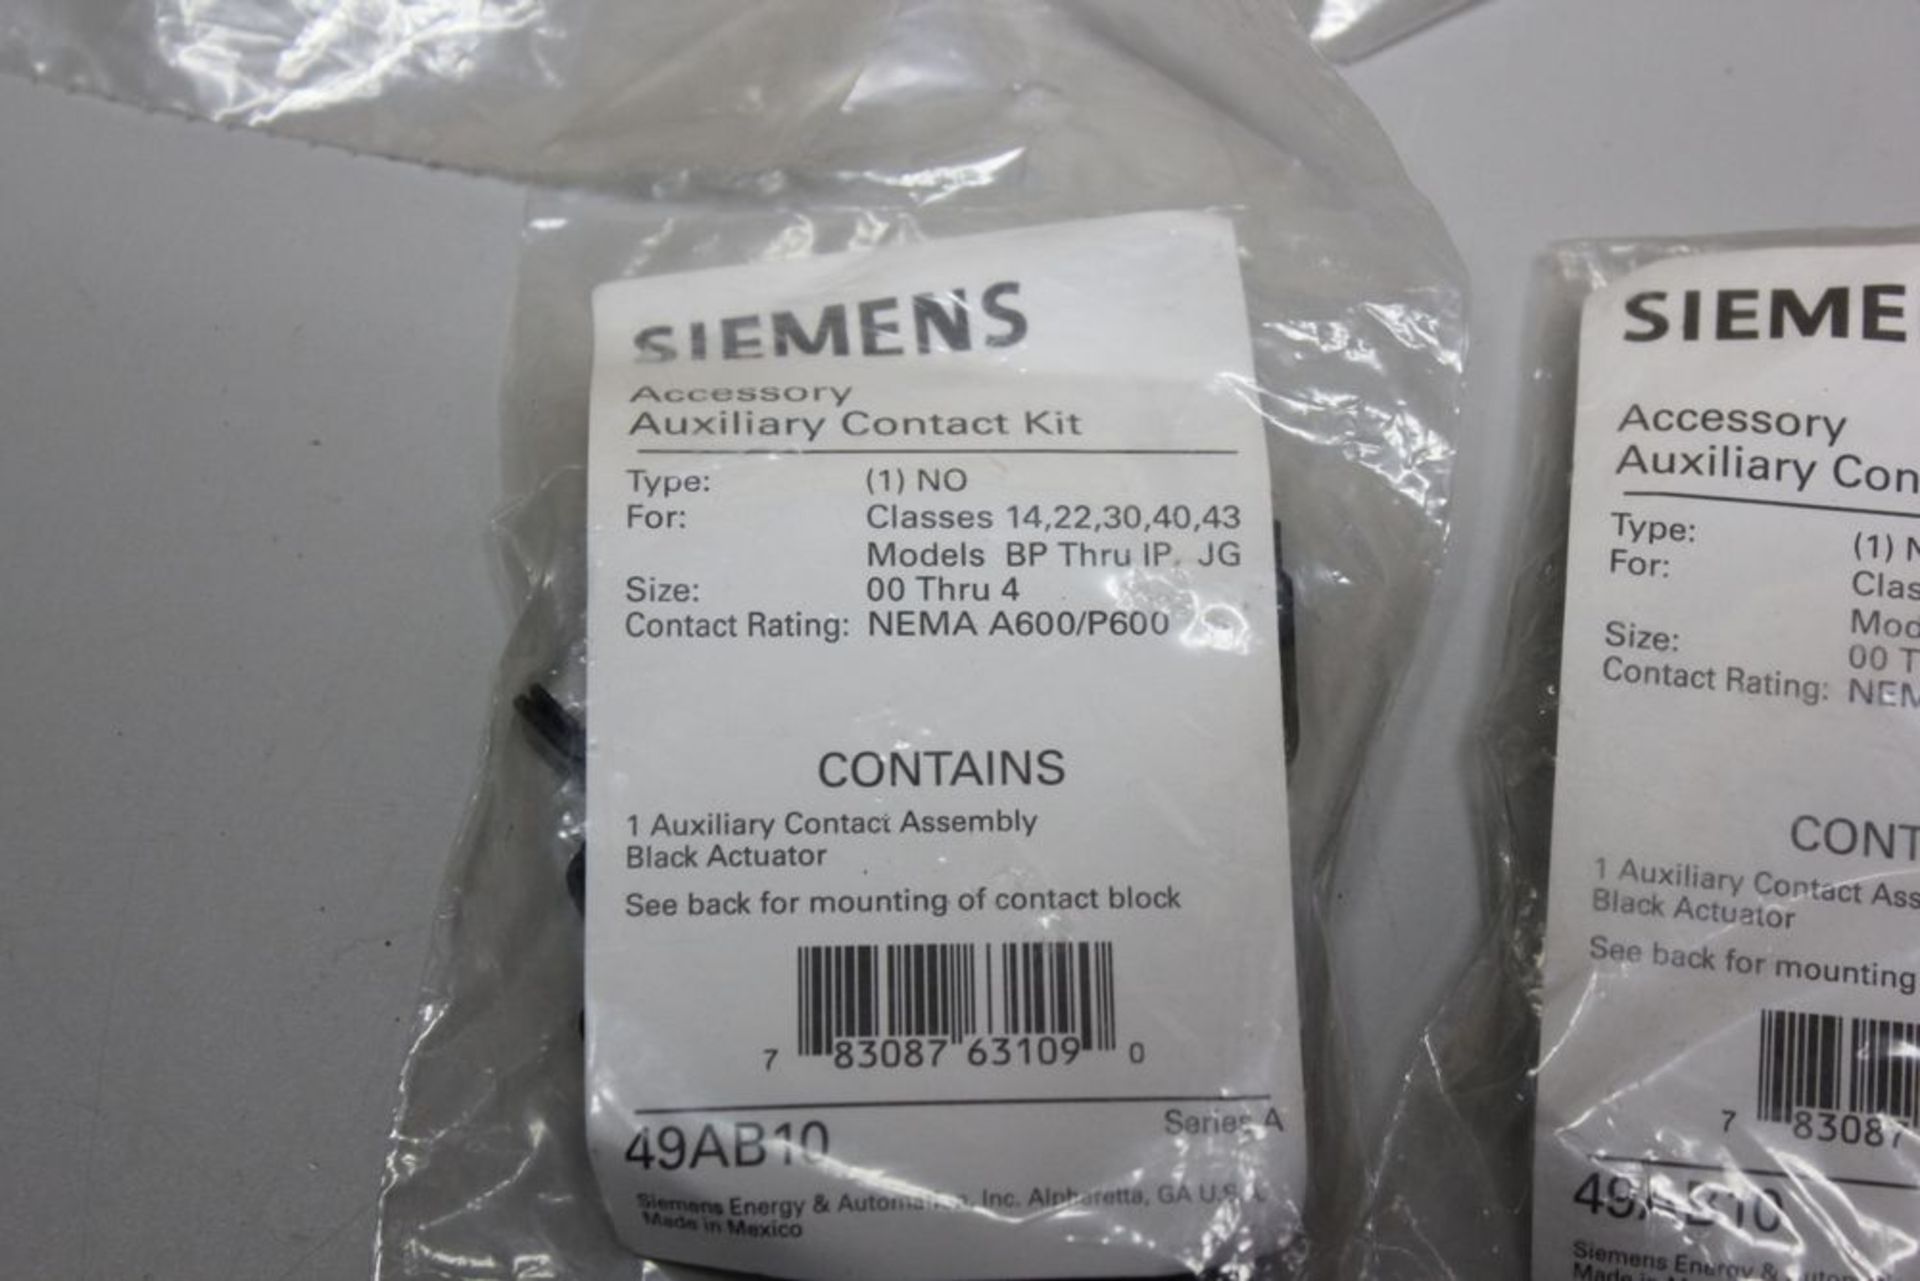 LOT OF NEW SIEMENS AUXILIARY CONTACT KITS - Image 2 of 3